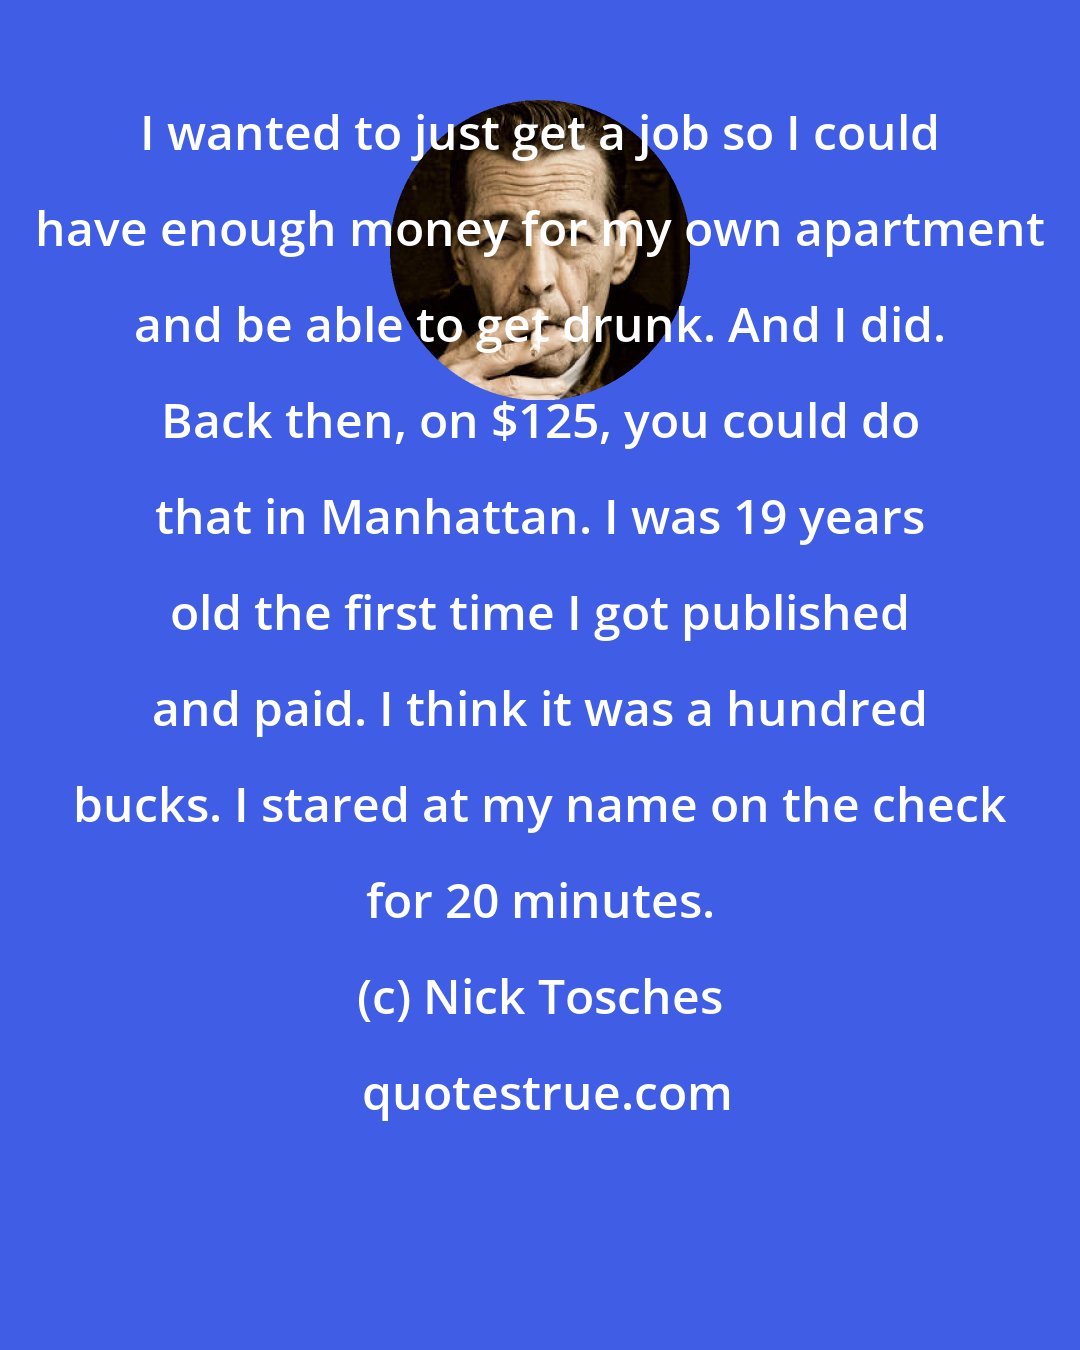 Nick Tosches: I wanted to just get a job so I could have enough money for my own apartment and be able to get drunk. And I did. Back then, on $125, you could do that in Manhattan. I was 19 years old the first time I got published and paid. I think it was a hundred bucks. I stared at my name on the check for 20 minutes.